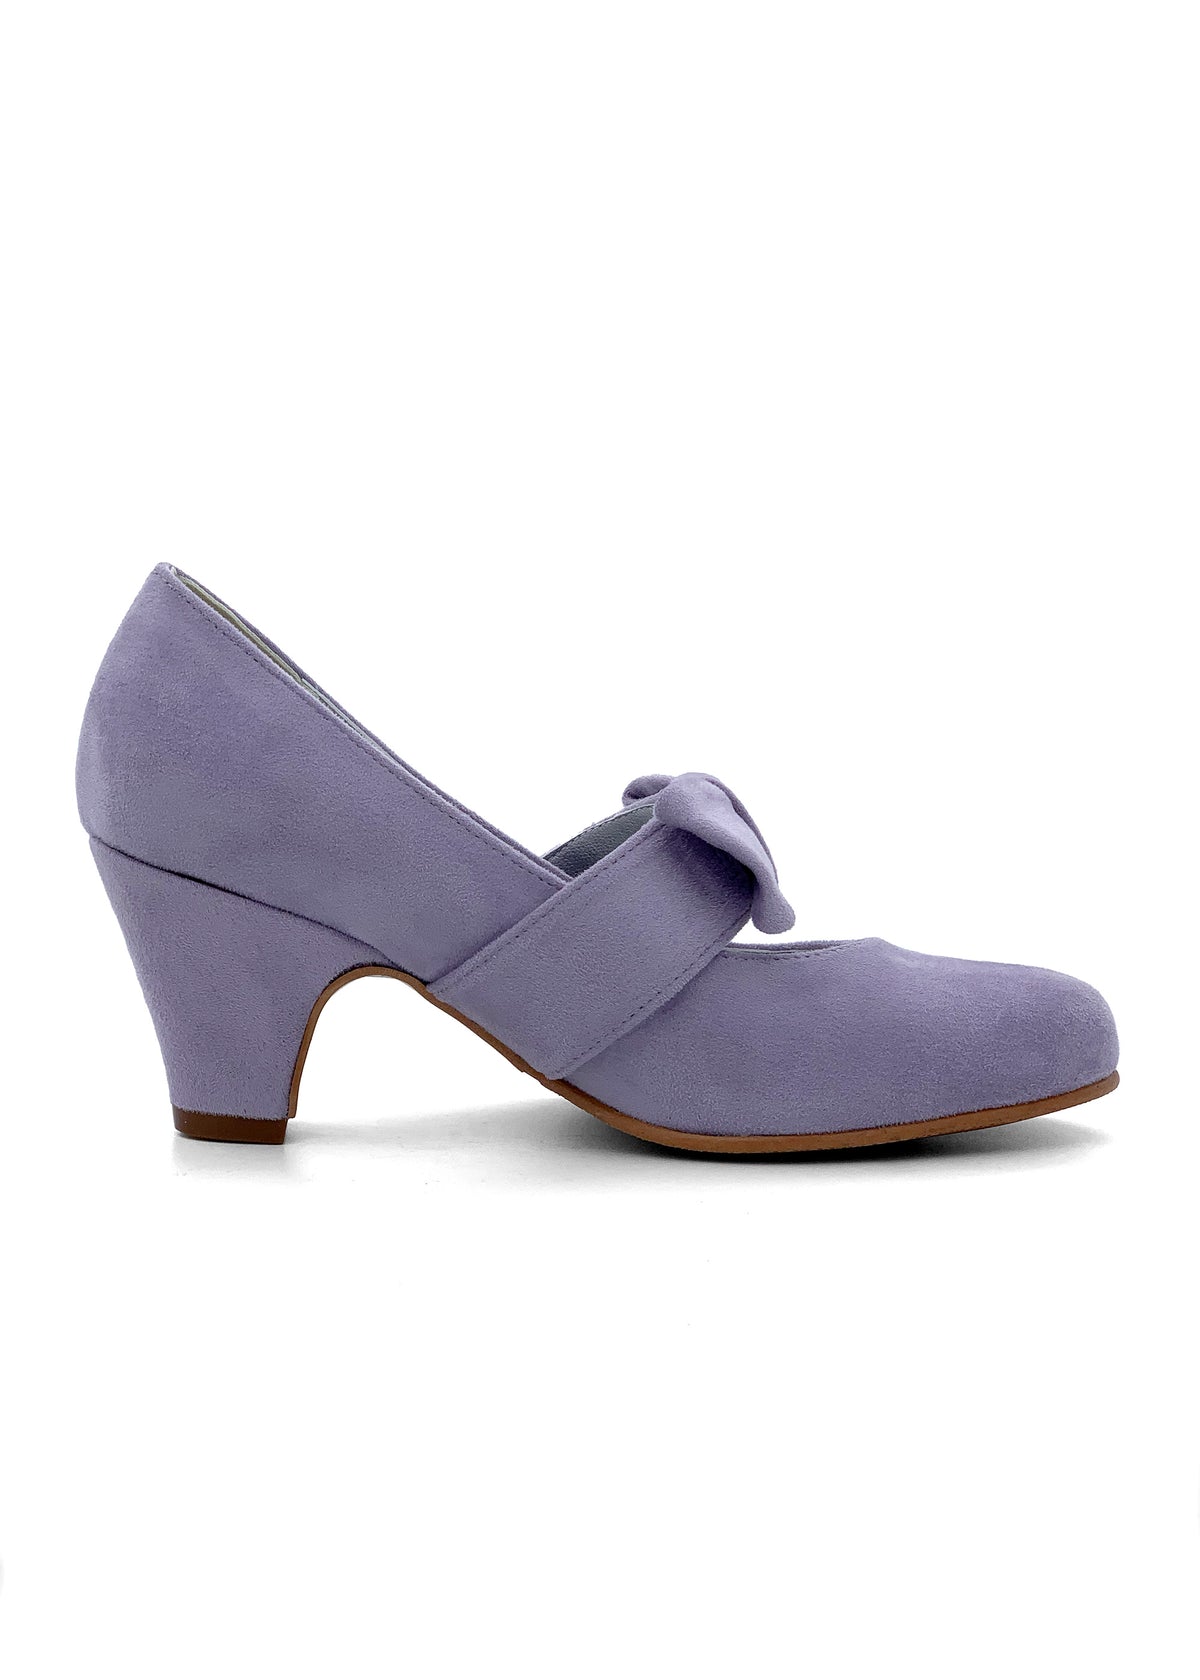 Open-toed shoes with bow straps - light purple